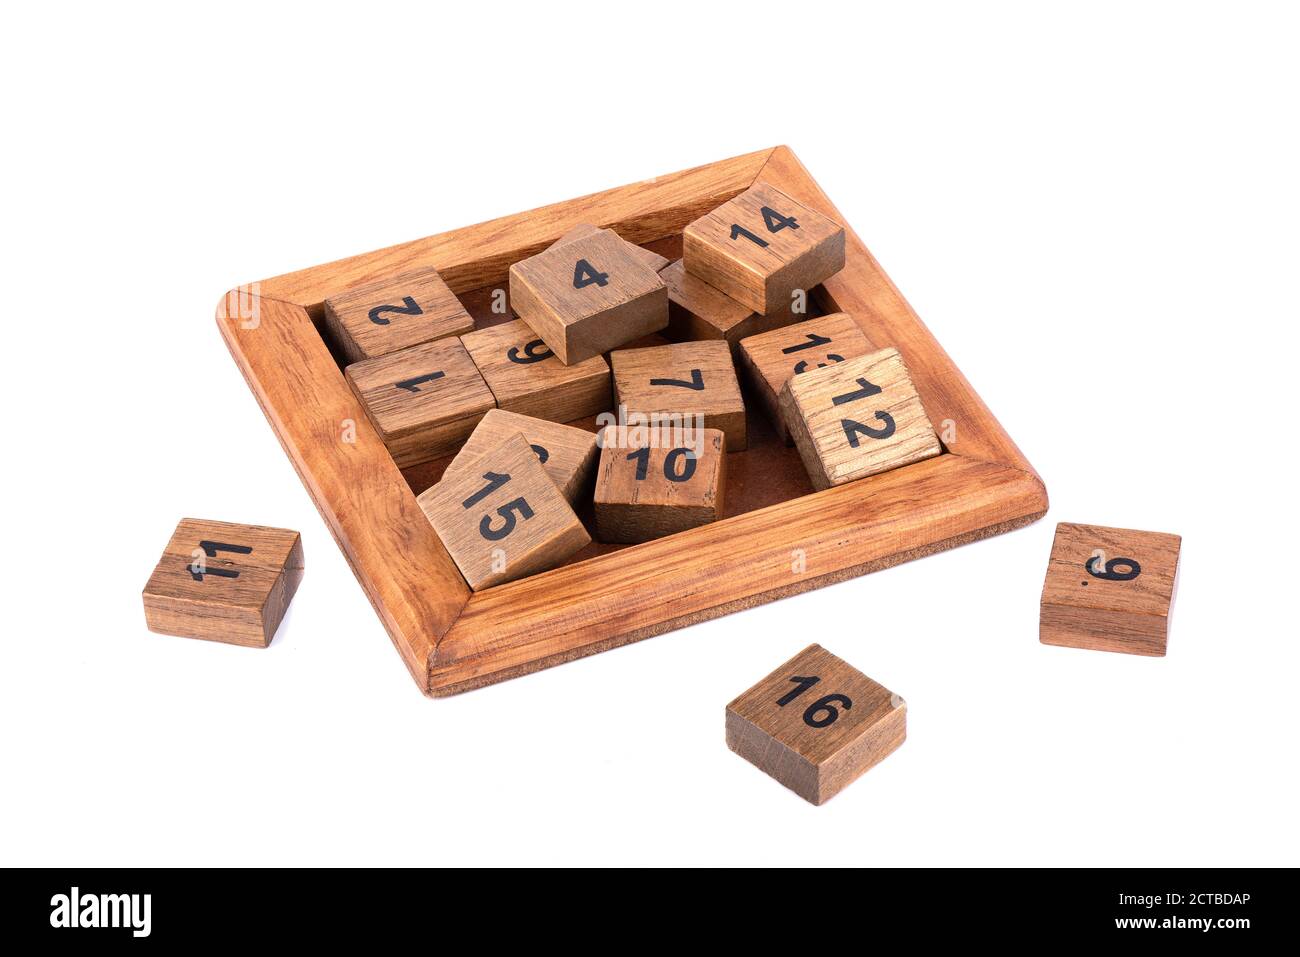 Board and cubes puzzle Game 15 over white background. Stock Photo